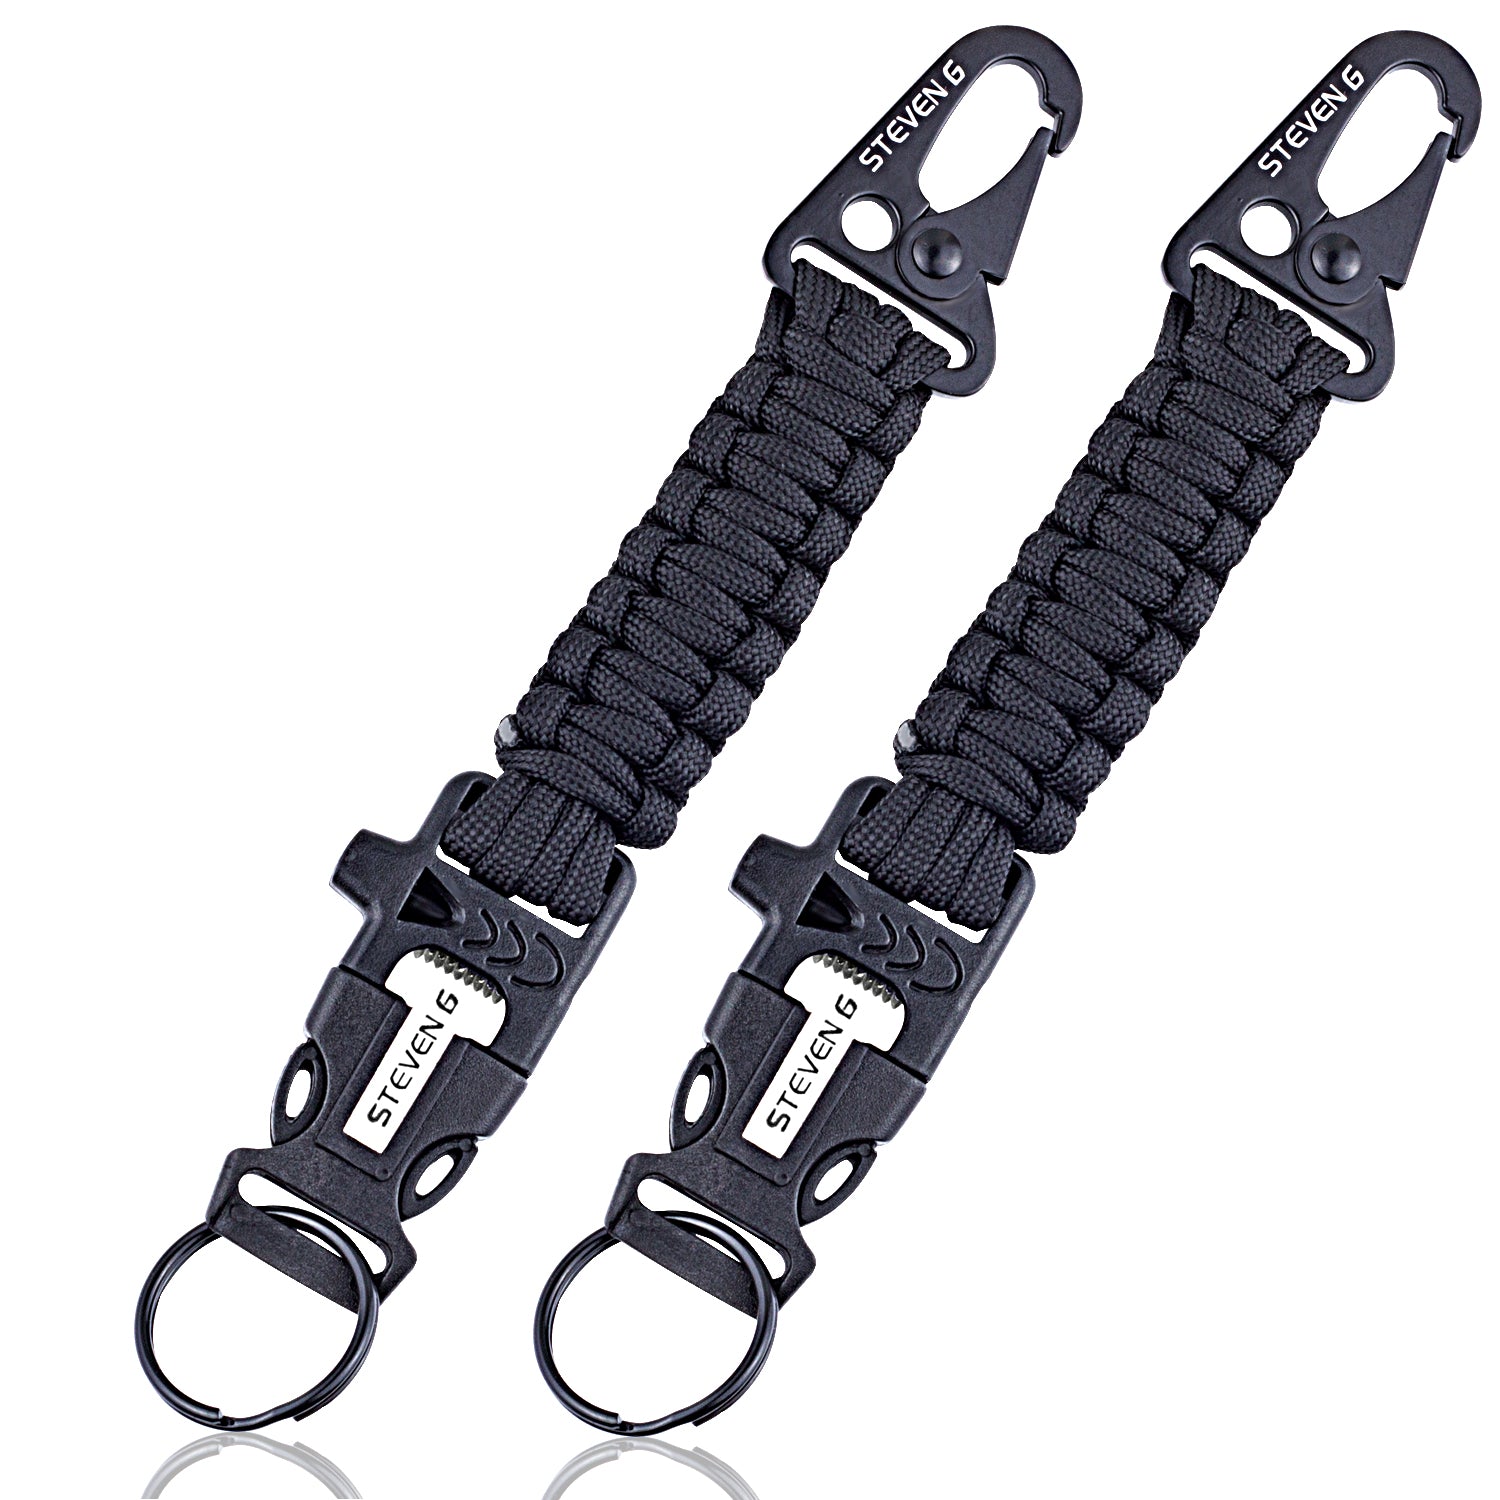 Steven G Paracord Carabiner Survival Keychain with Firestarter and Whi